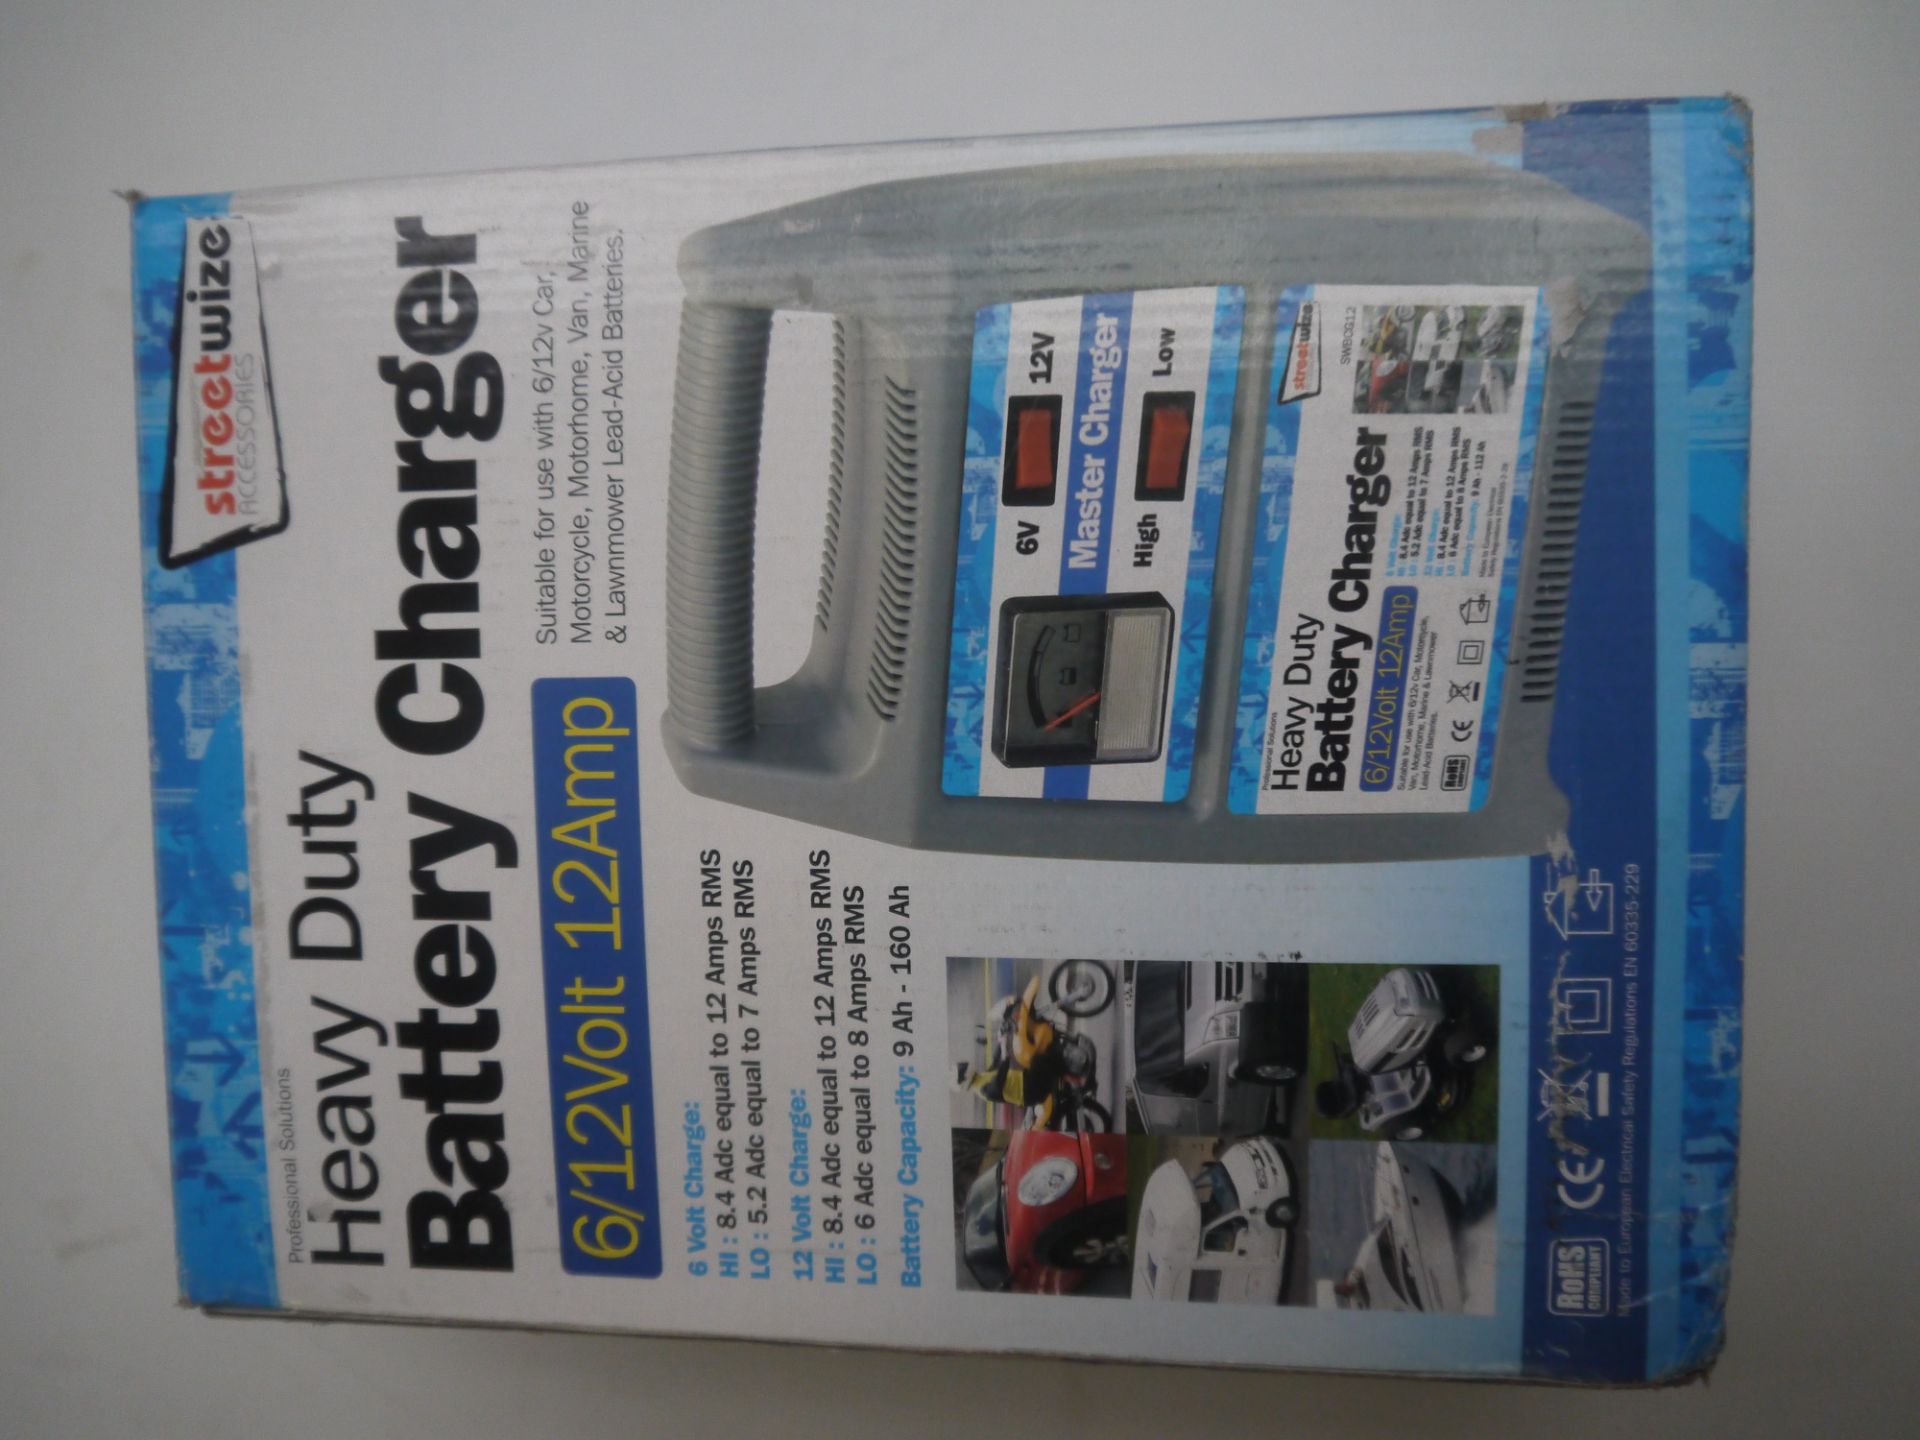 StreetWize 6/12V 12Amp Heavy Duty Battery Charger. Boxed.